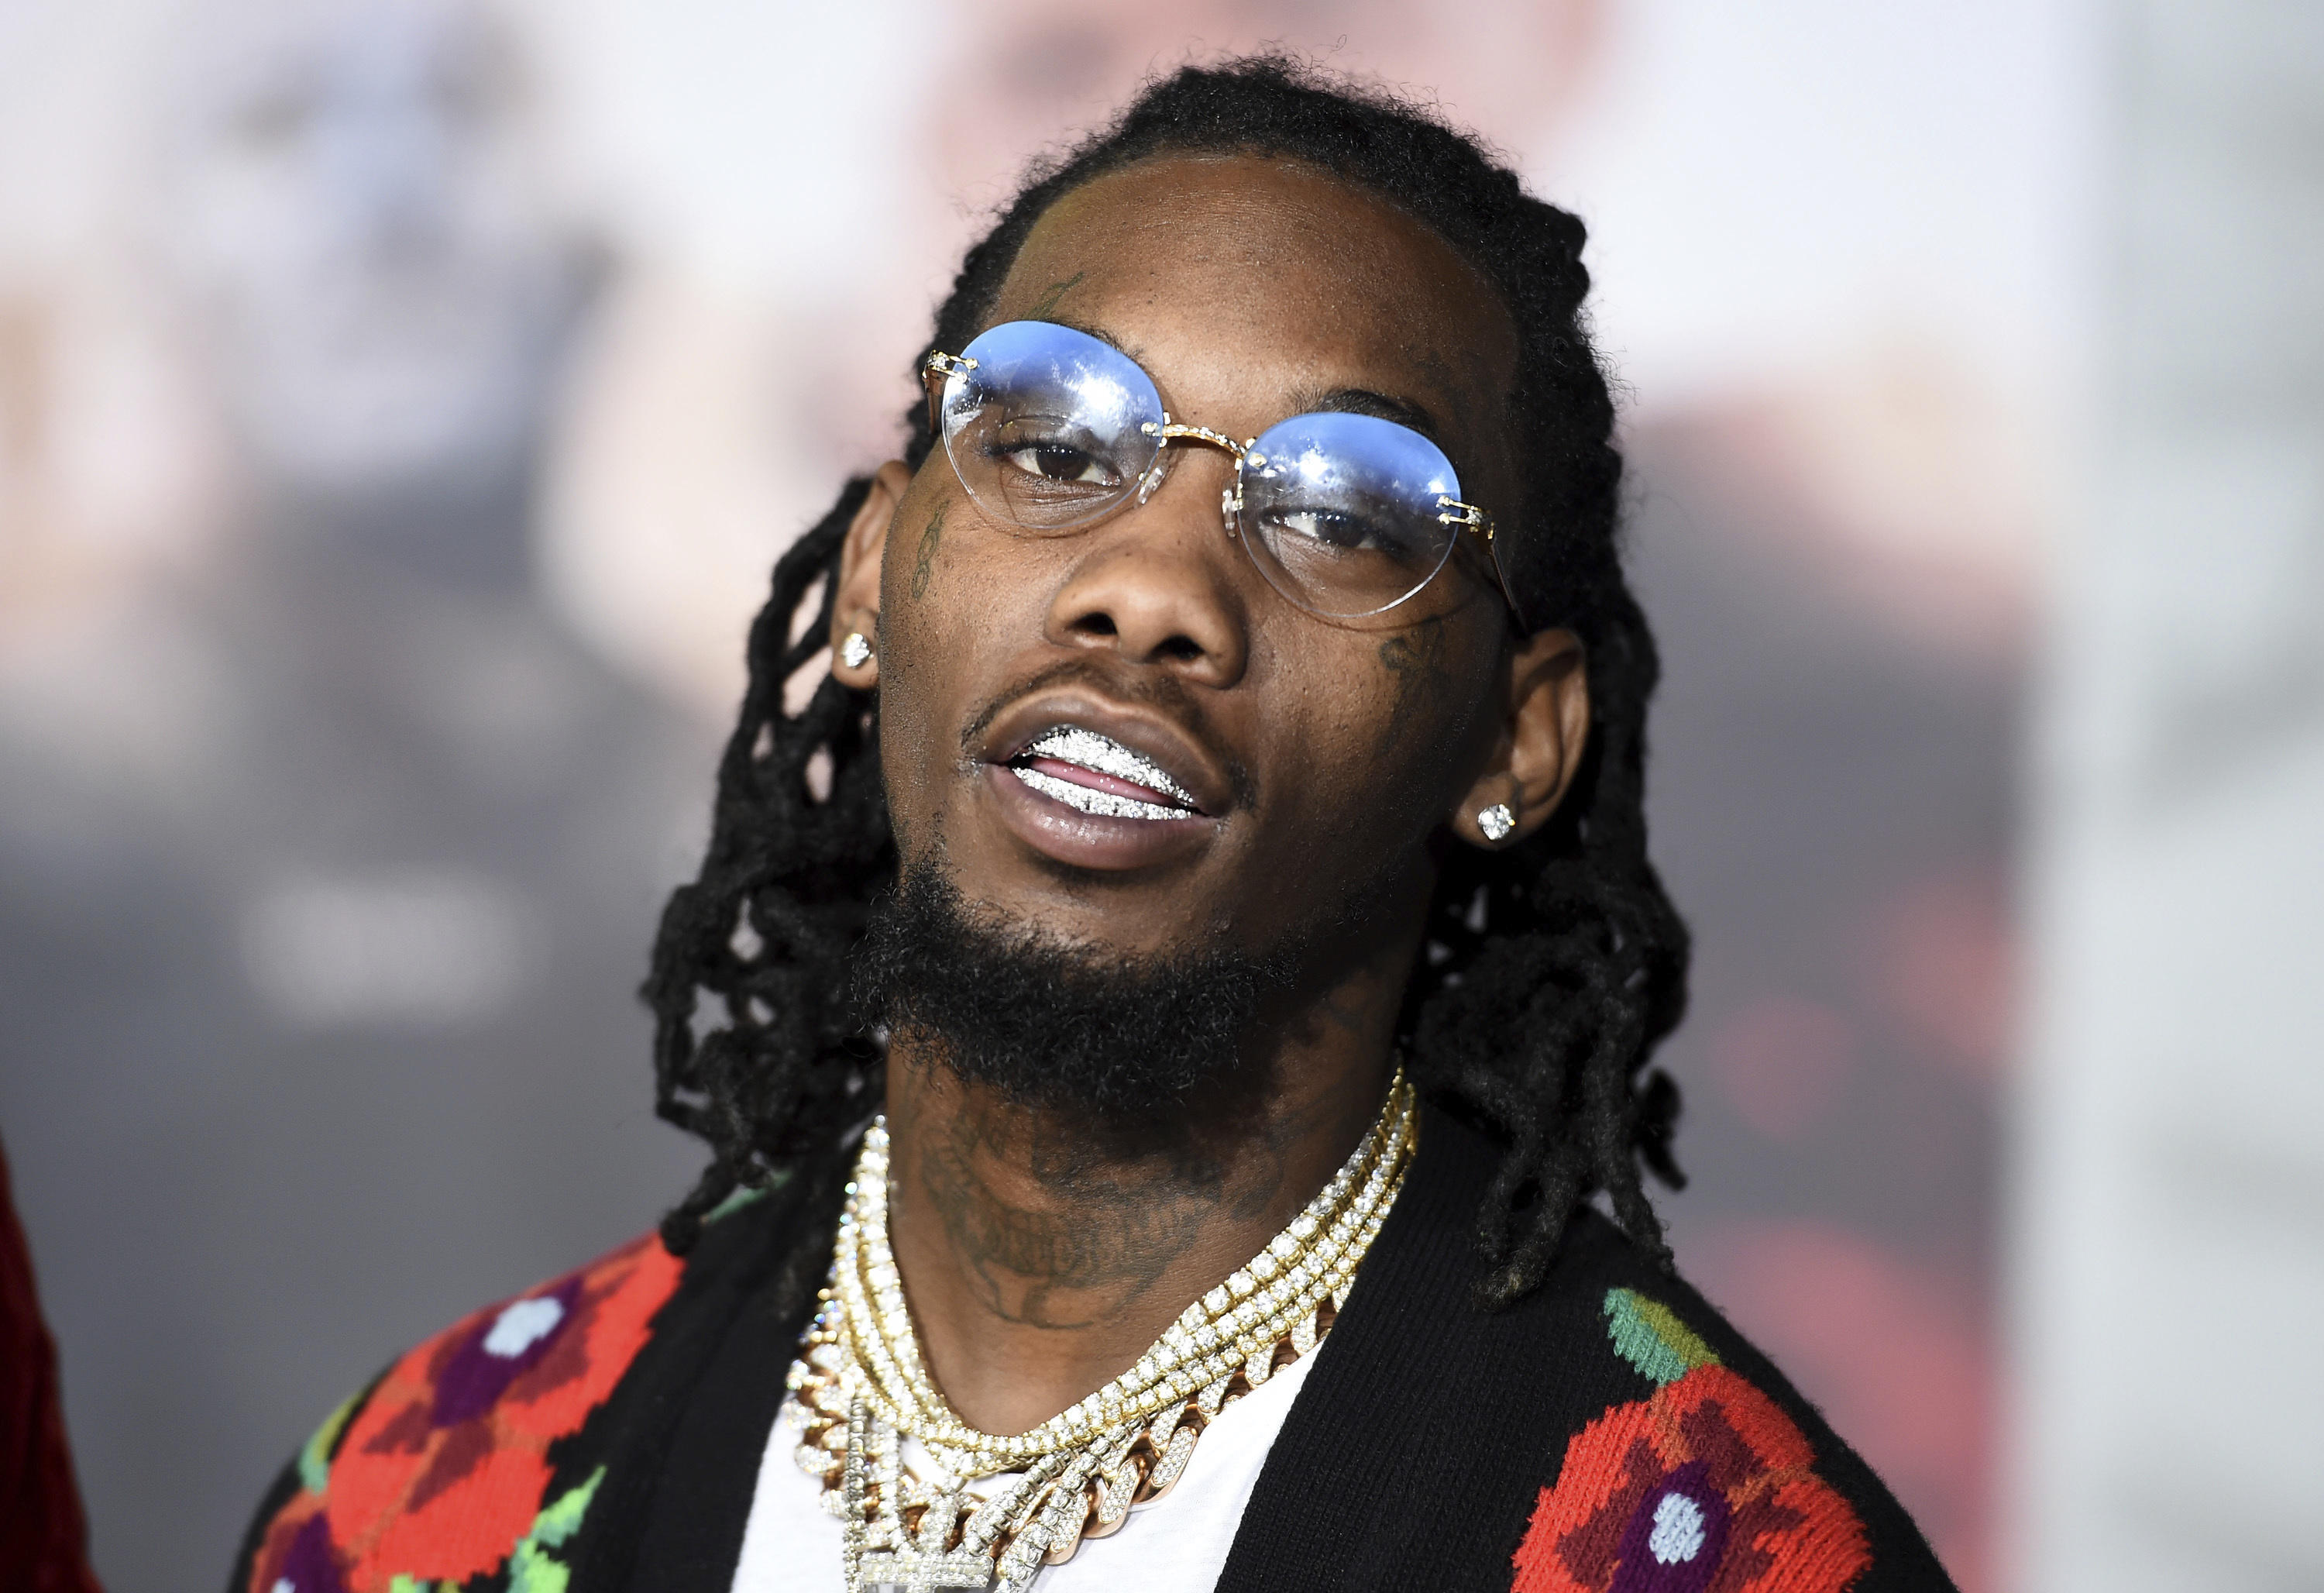 Migos' Offset, husband of Cardi B, arrested on felony gun charges in